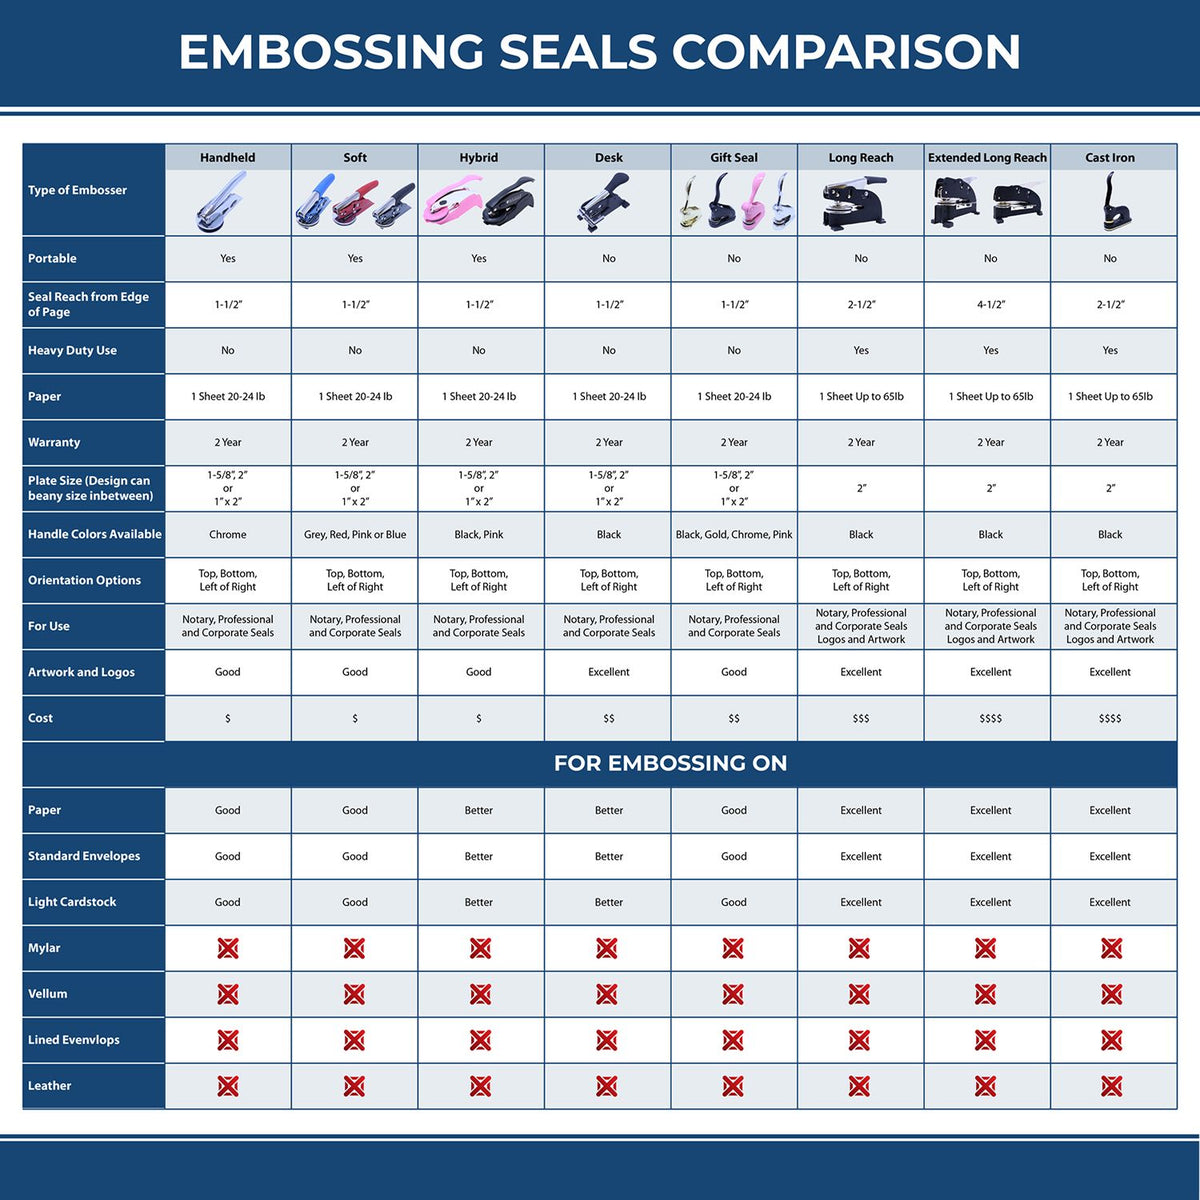 A comparison chart for the different types of mount models available for the Heavy Duty Cast Iron Maryland Land Surveyor Seal Embosser.